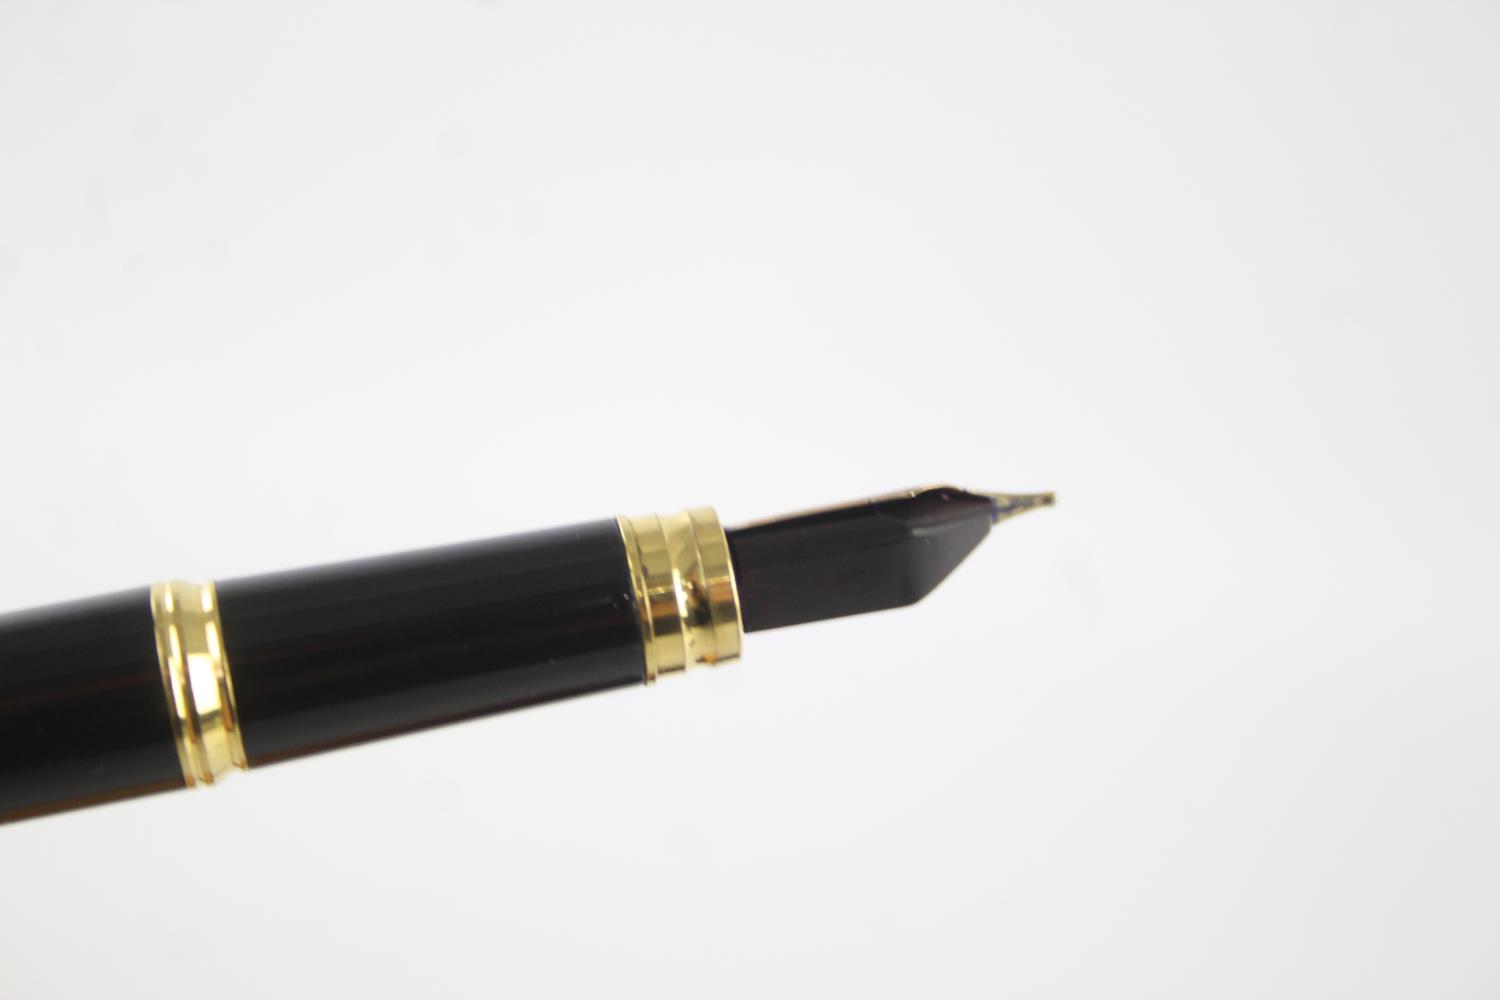 WATERMAN Ideal Black Lacquer FOUNTAIN PEN w/ 18ct Gold Nib WRITING Boxed WATERMAN Ideal Black - Image 4 of 8